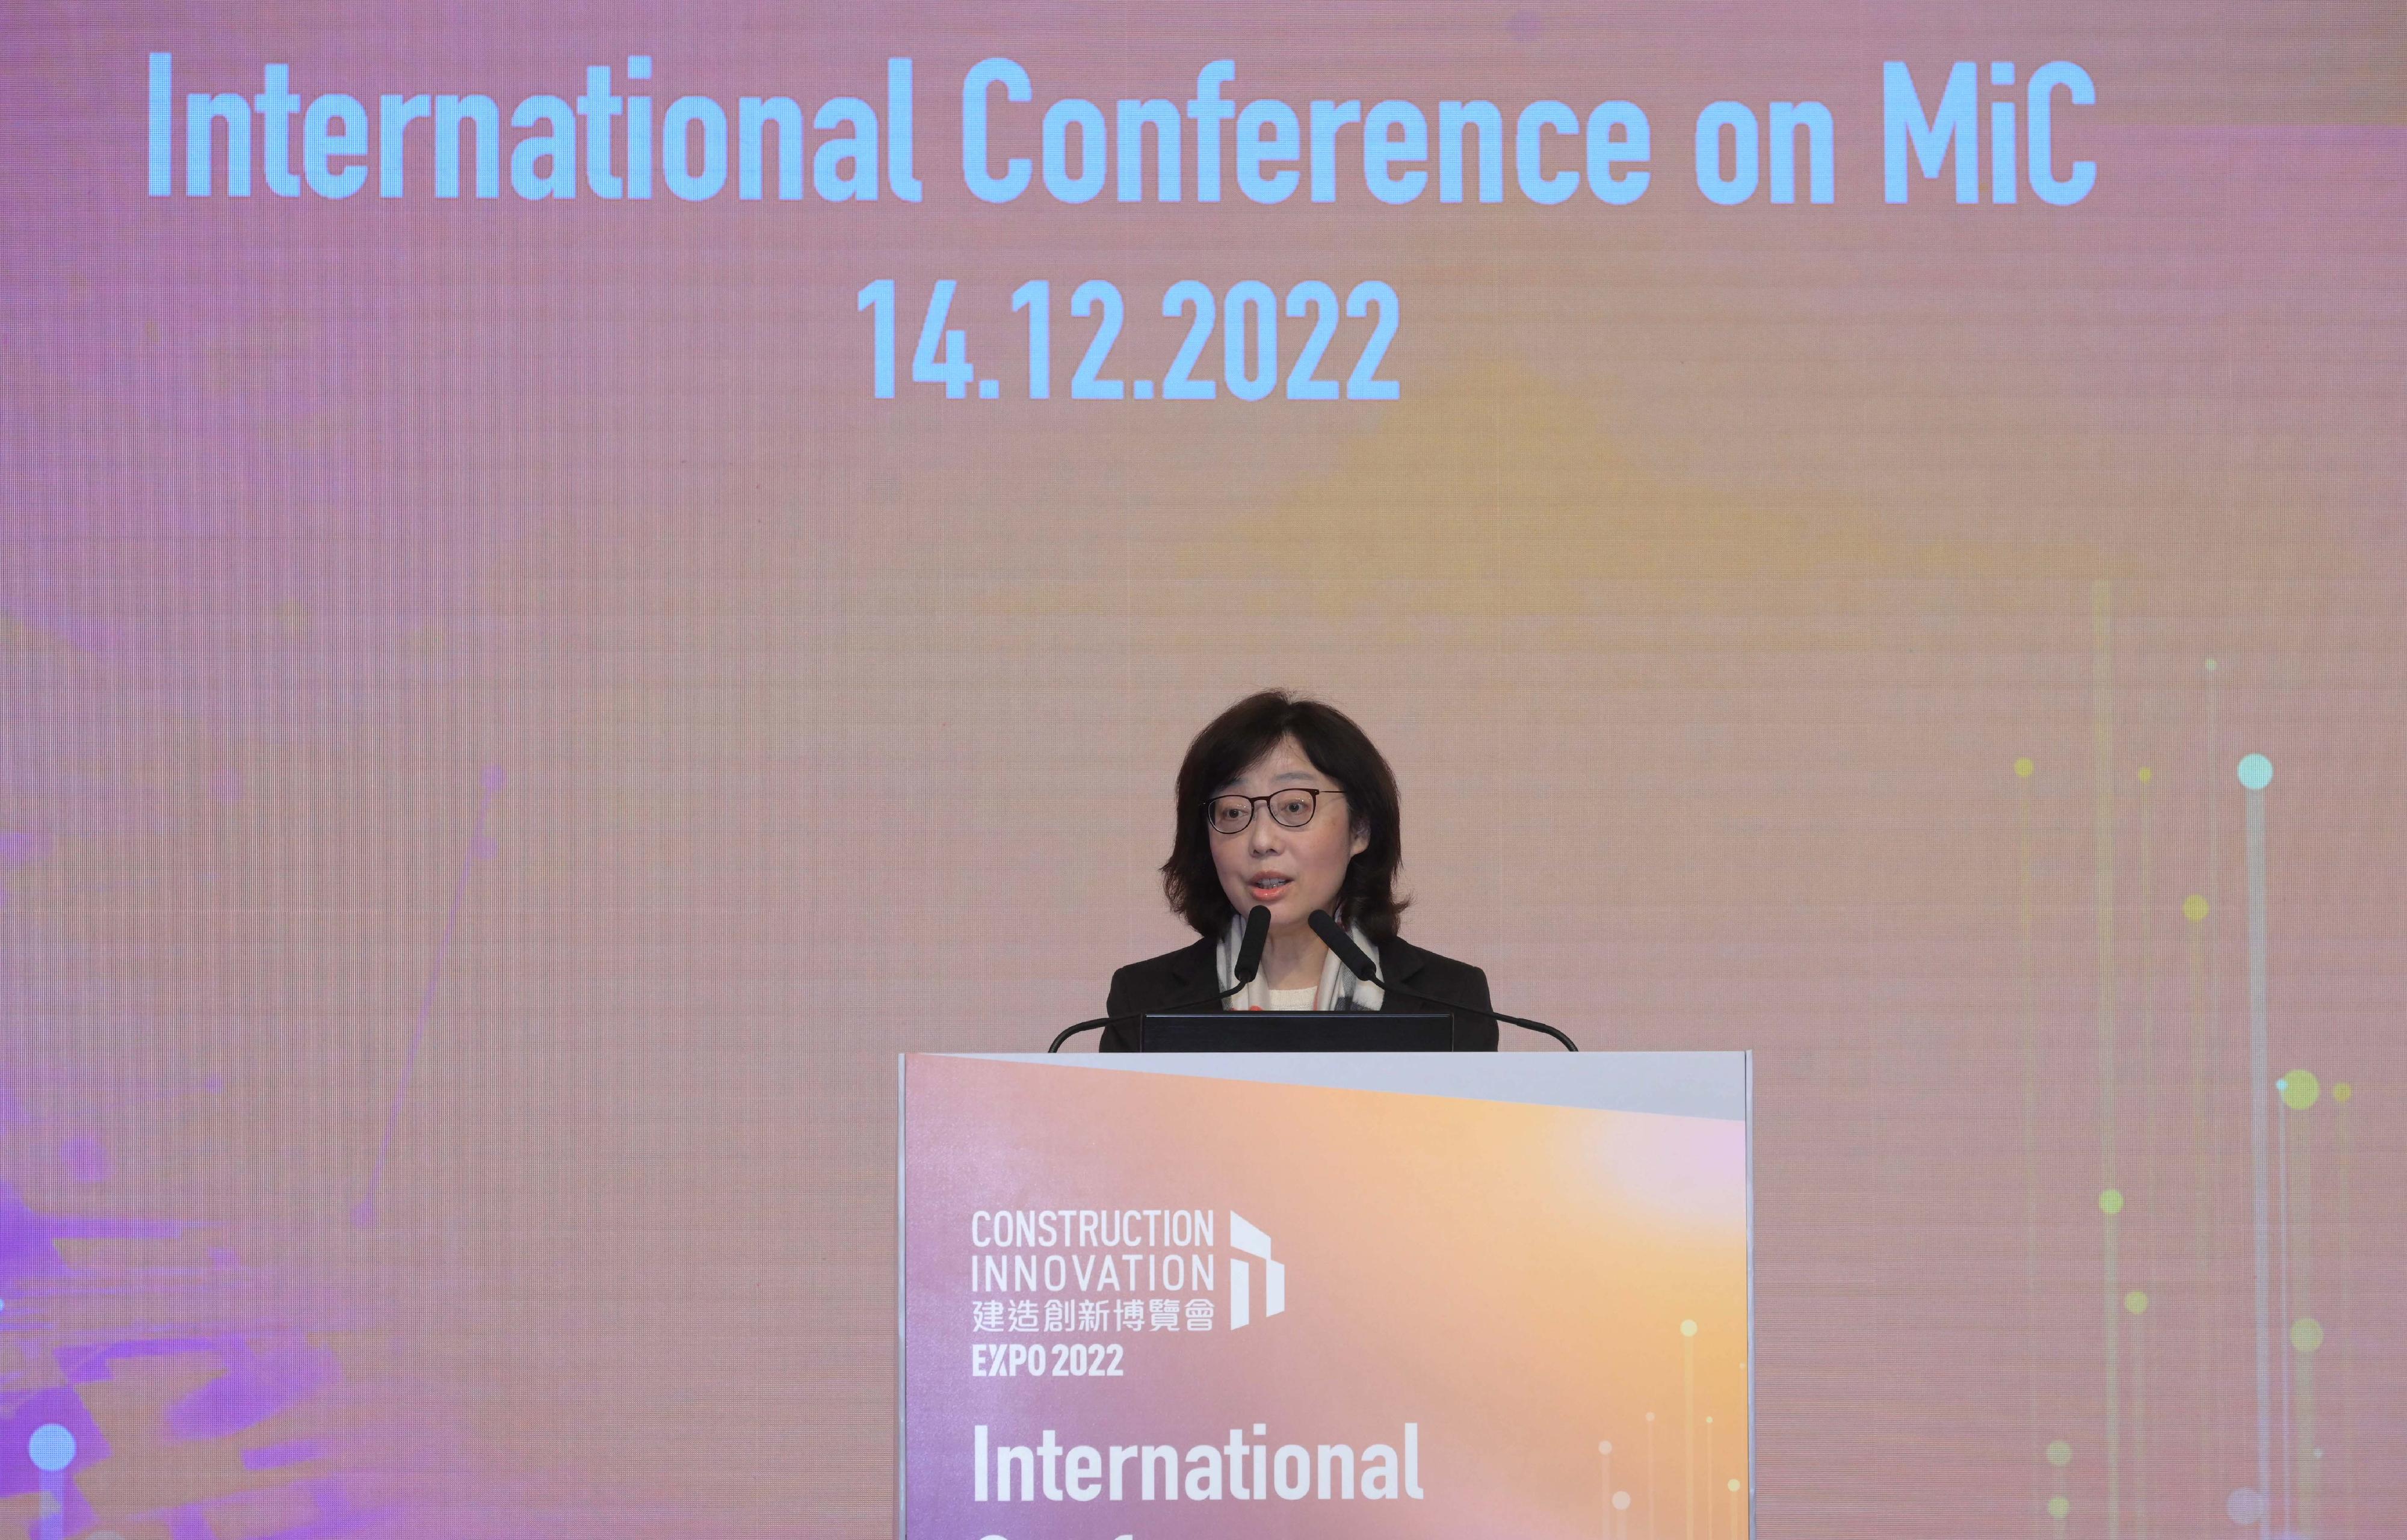 The Secretary for Development, Ms Bernadette Linn, delivered a welcome speech at the Construction Innovation Expo 2022 - International Conference on MiC today (December 14).